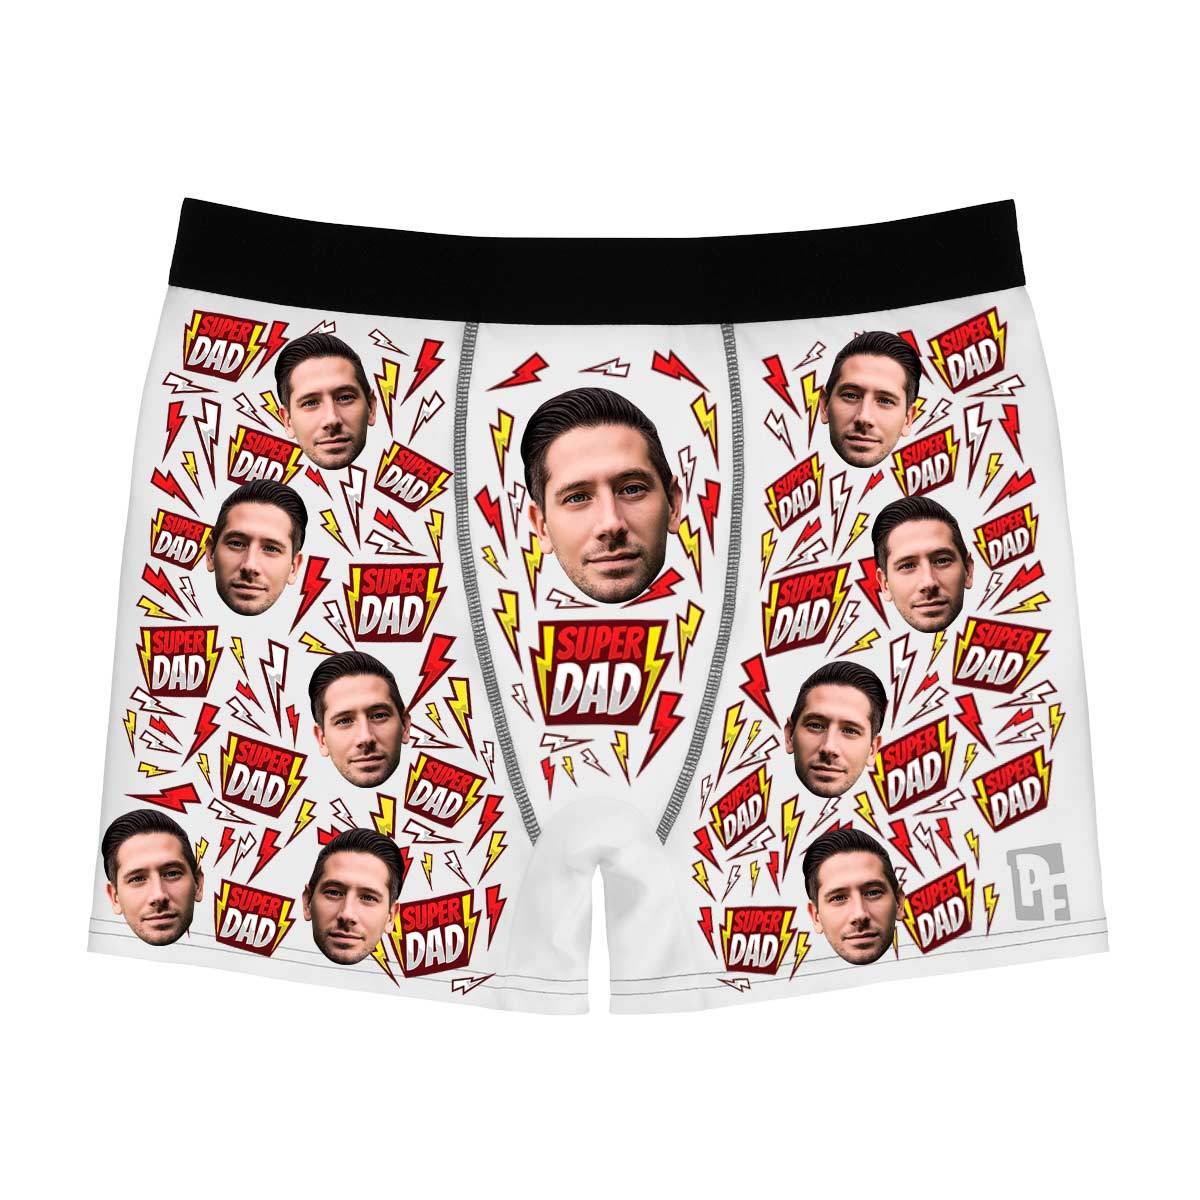 White Super dad men's boxer briefs personalized with photo printed on them